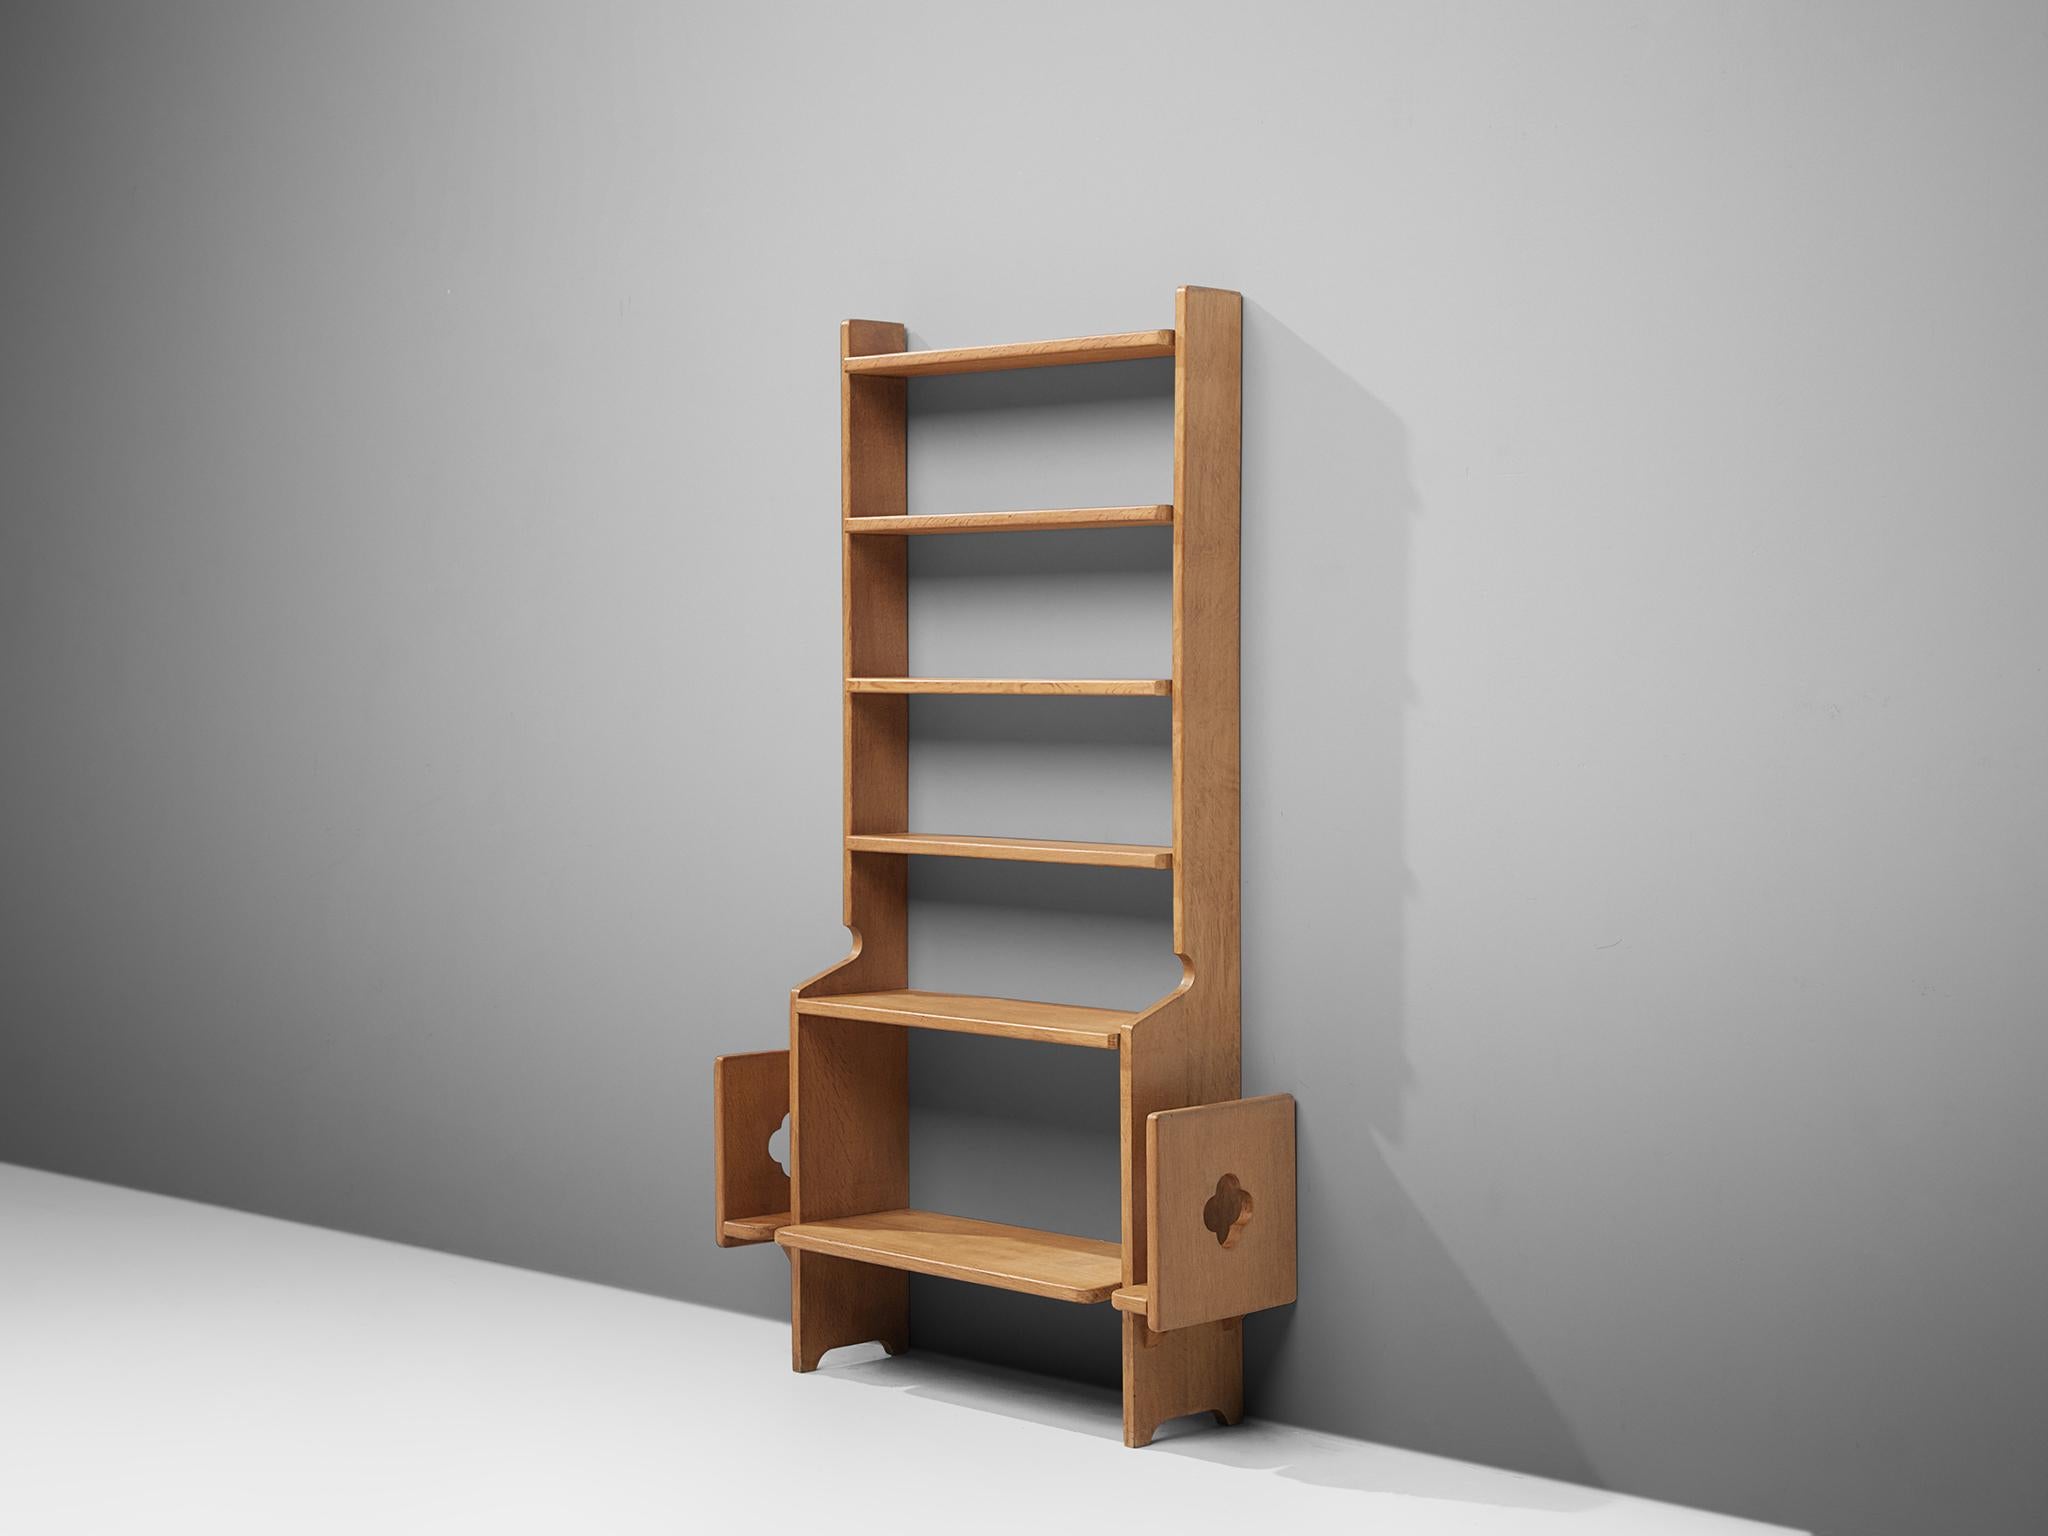 Guillerme et Chambron for Votre Maison, bookcase, solid oak, France, 1960s

French bookcase in solid oak by designer duo Guillerme et Chambron. This open bookcase has a simplified yet elegant design. Six shelves allow the user to store its personal